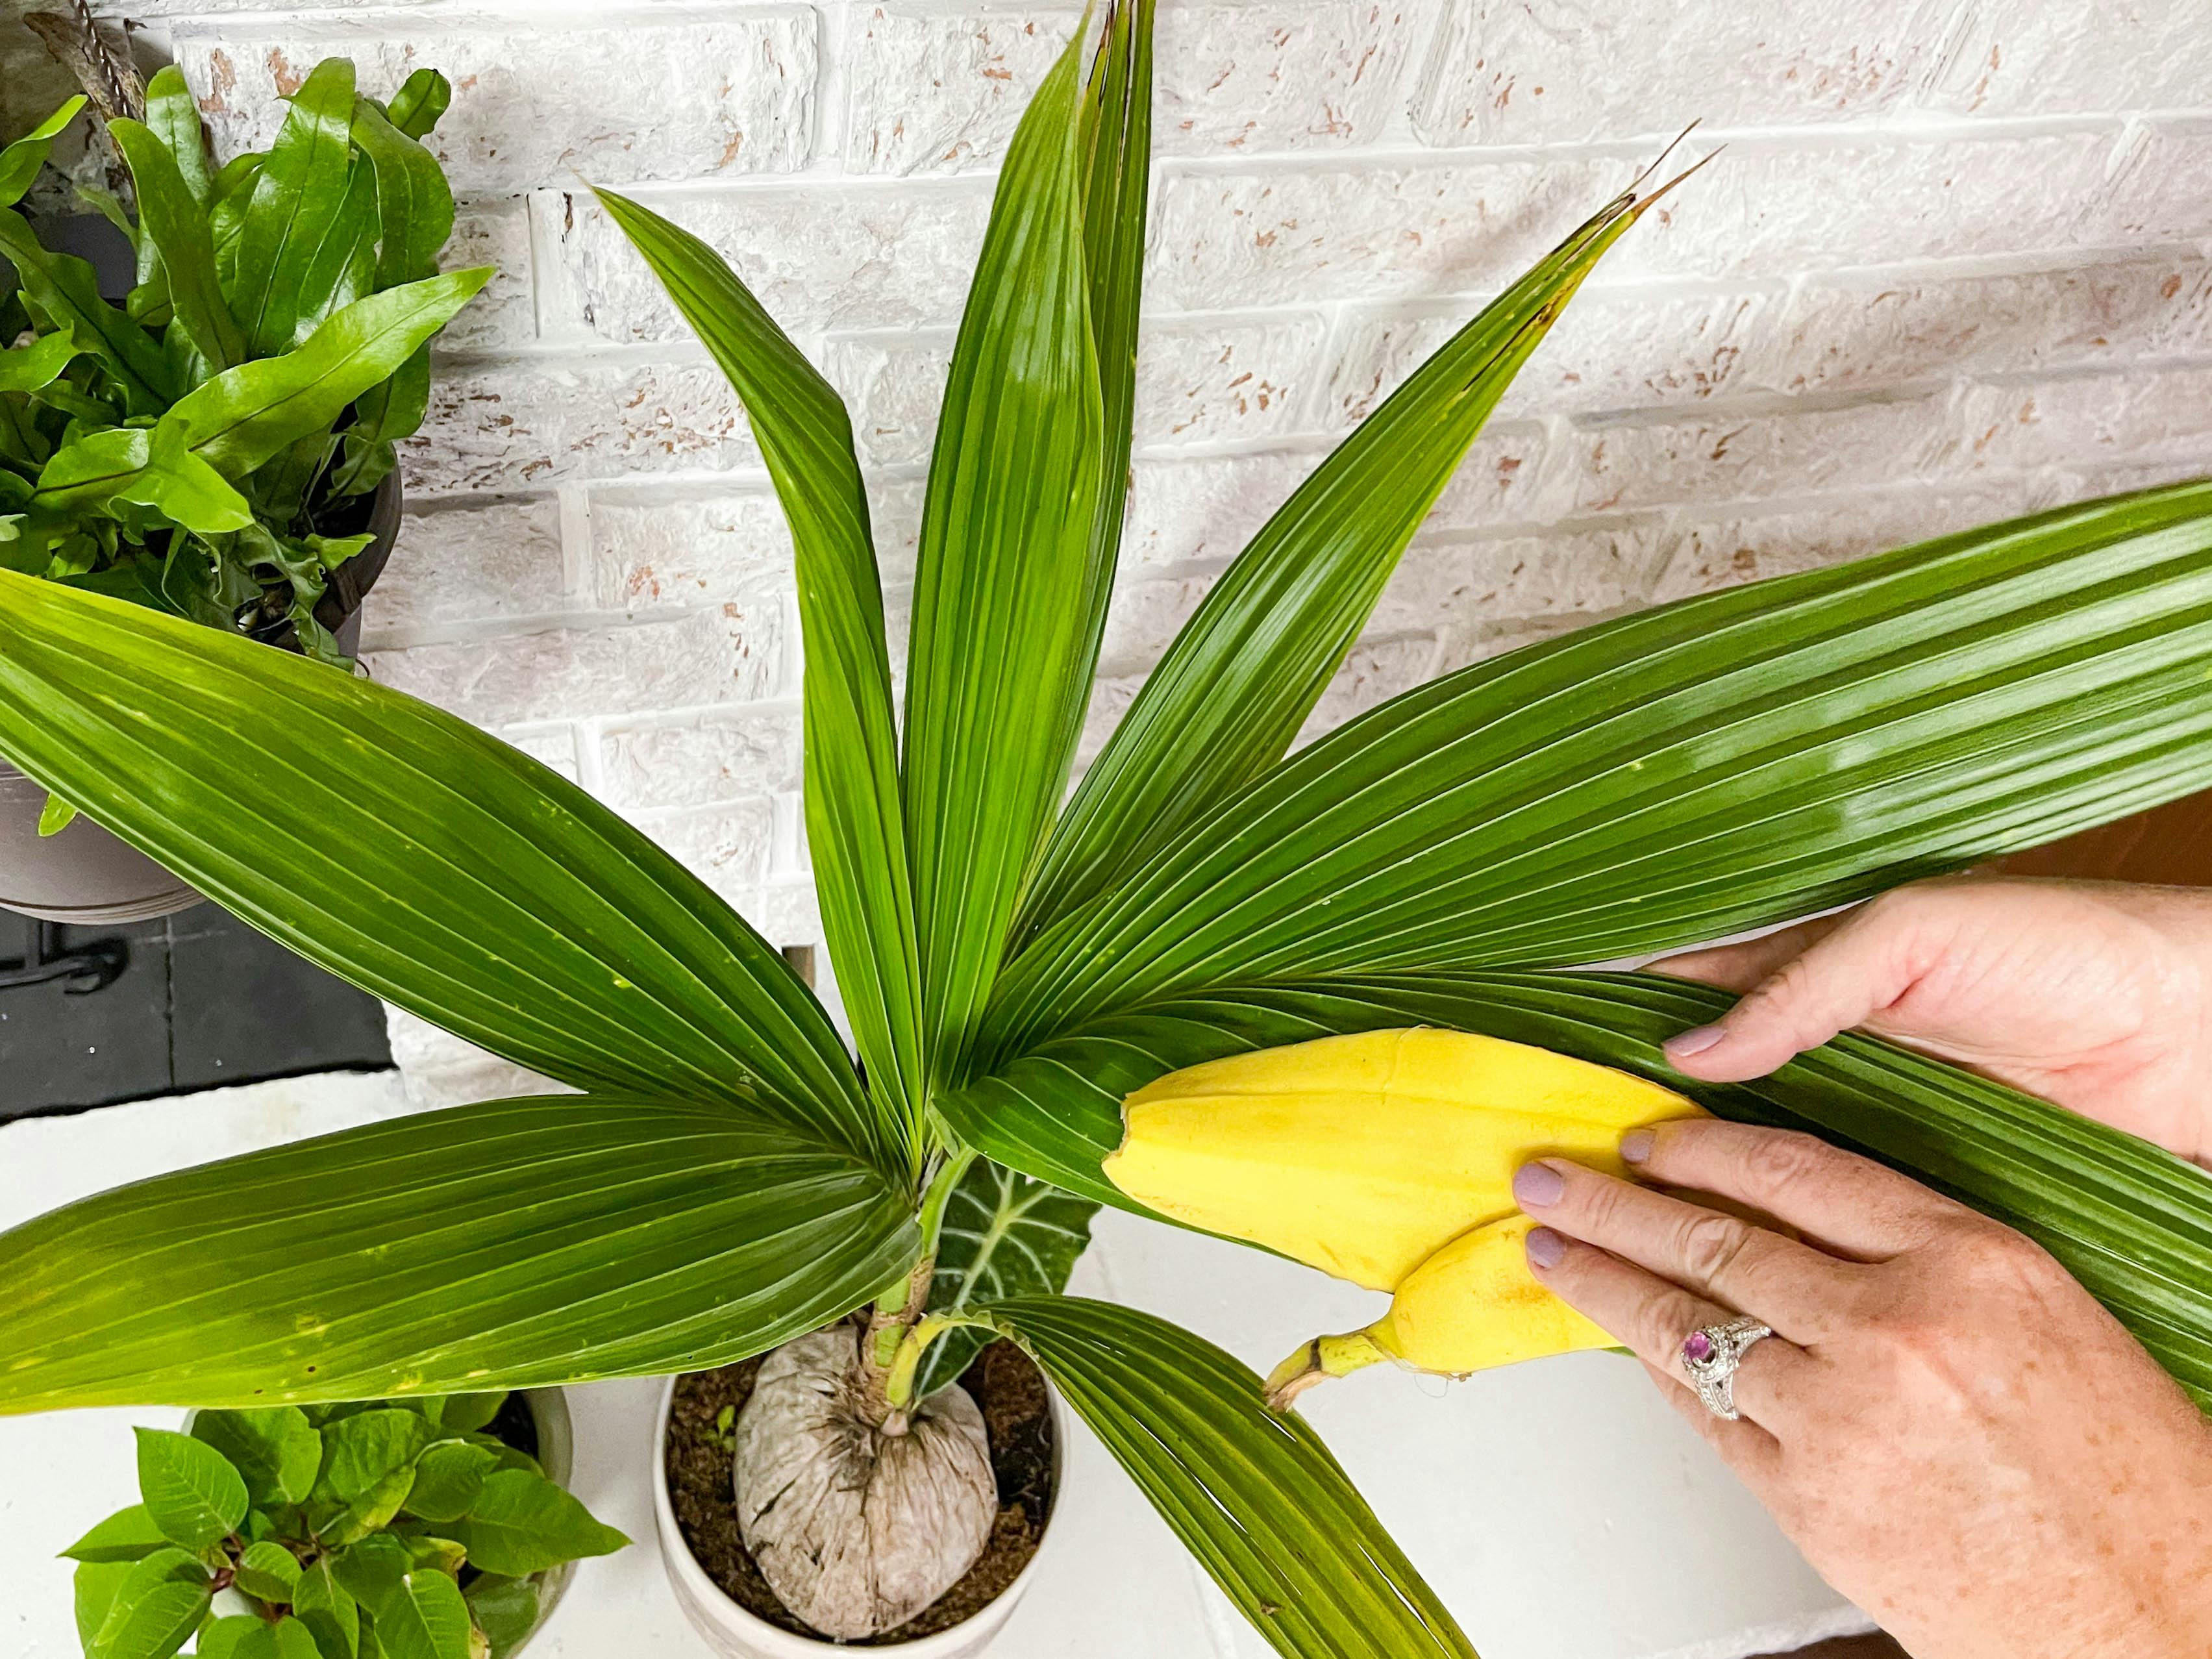 wiping a banana peal on palm plant leaves